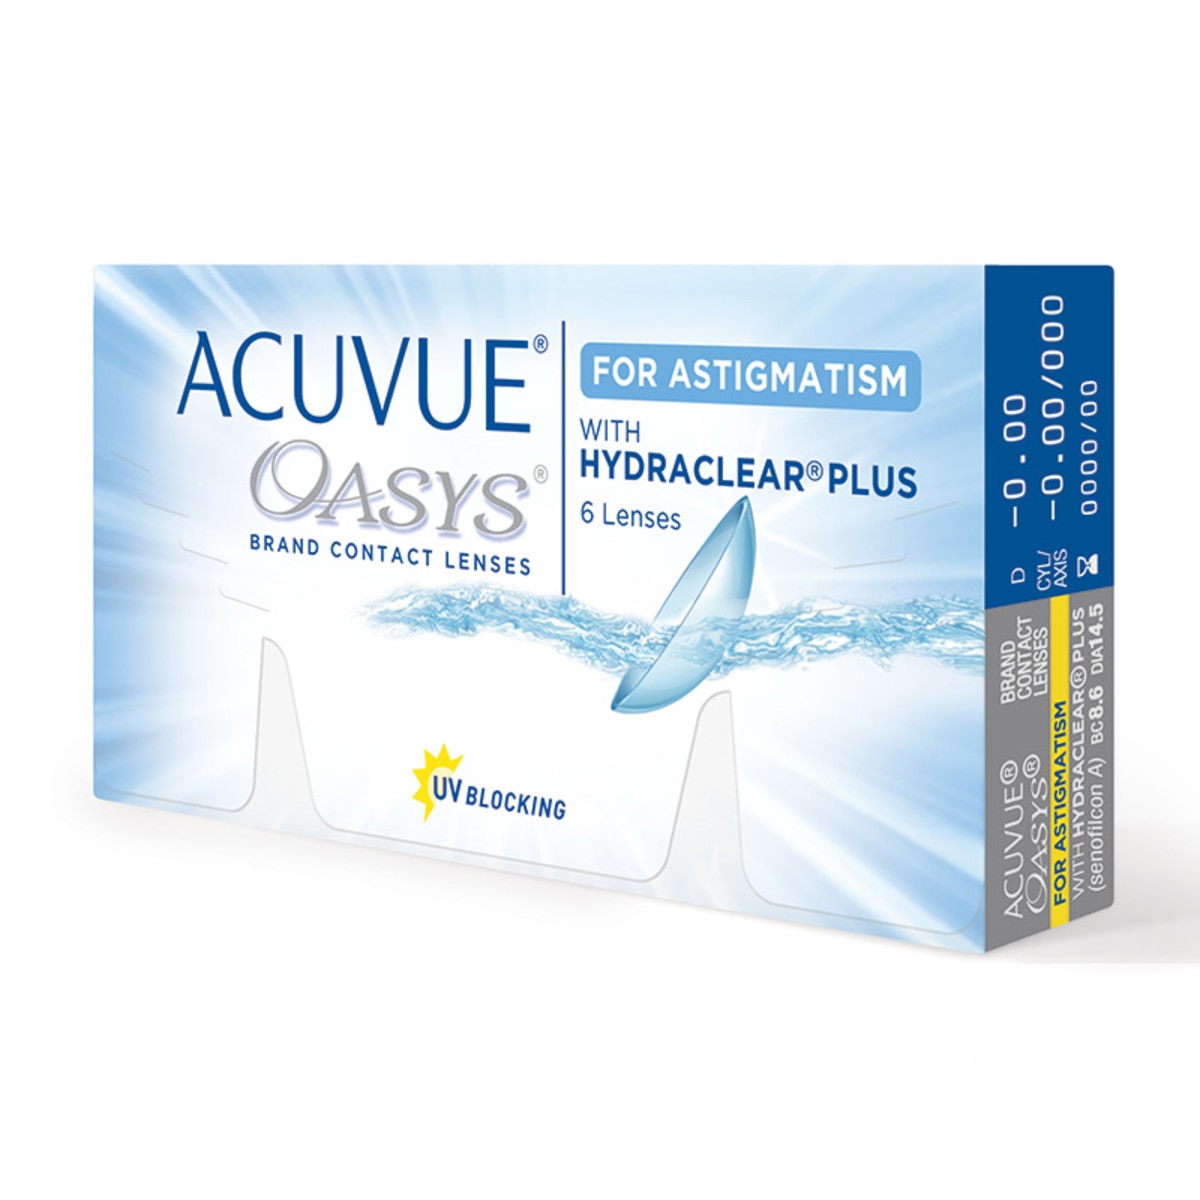 ACUVUE OASYS® con HYDRACLEAR Plus® para Astigmatismo (D -3.75, Cyl/Axis -1.75/50)